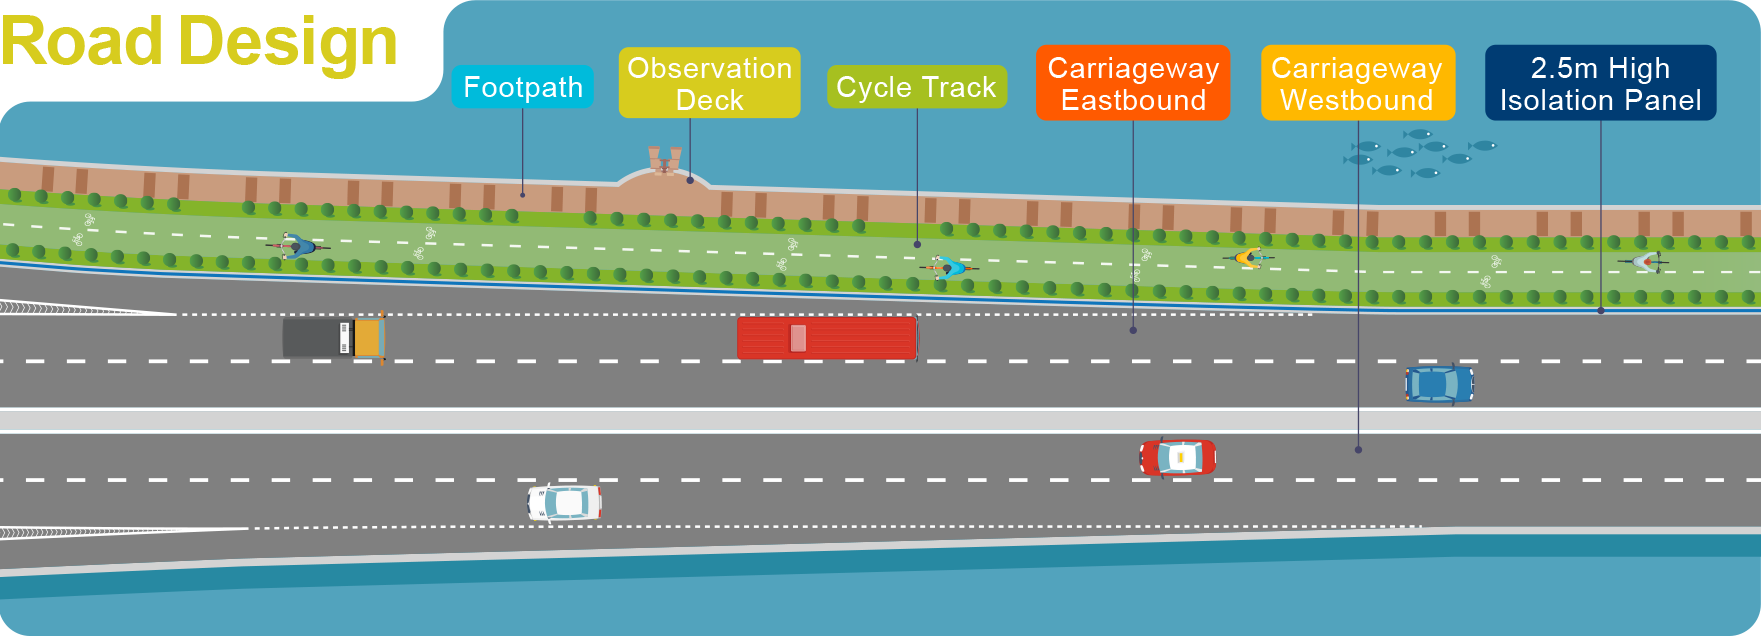 CBL is an about 1.8km long dual two-lane carriageway with a cycle track and a footpath across Junk Bay